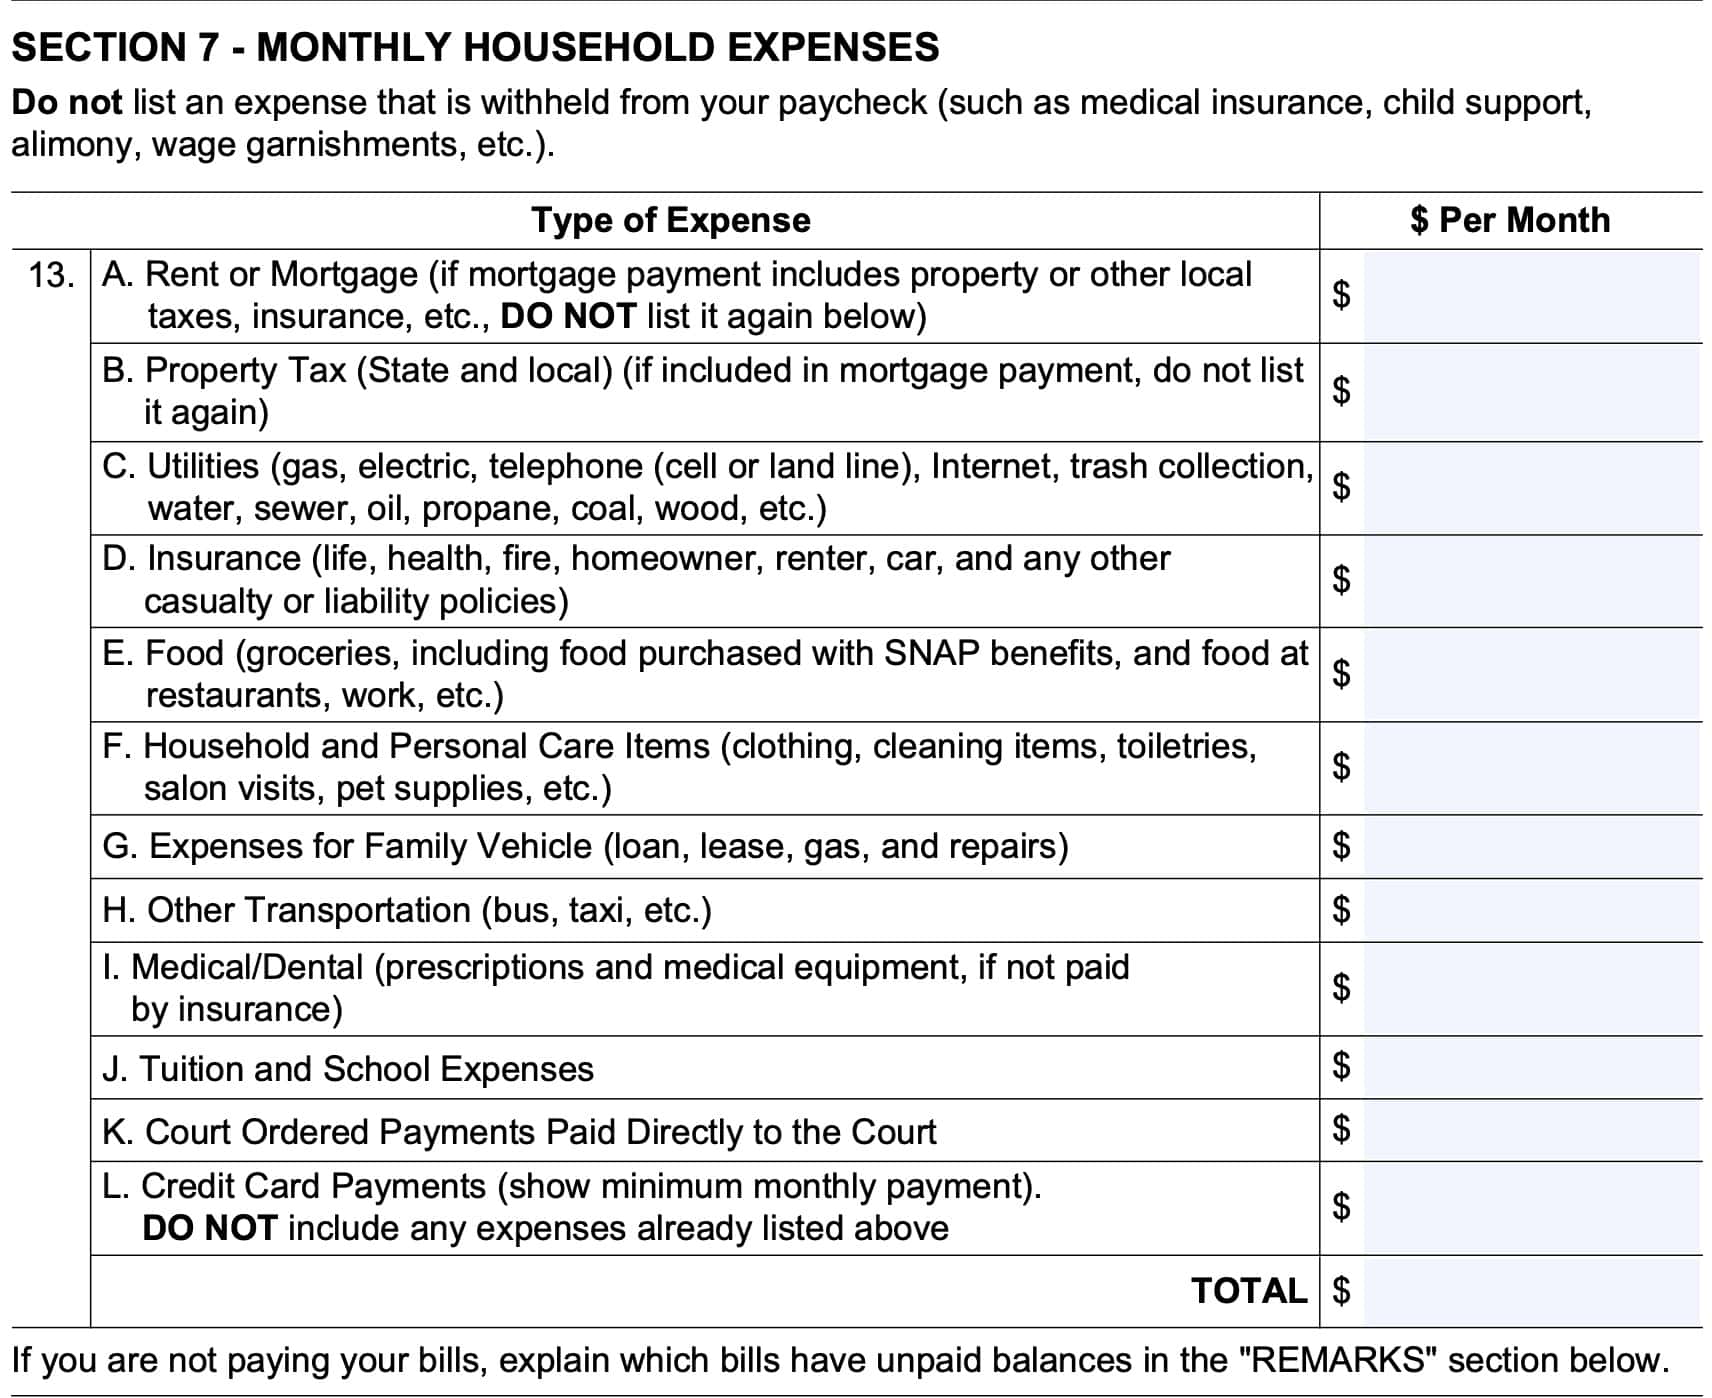 Section 7, monthly household expenses